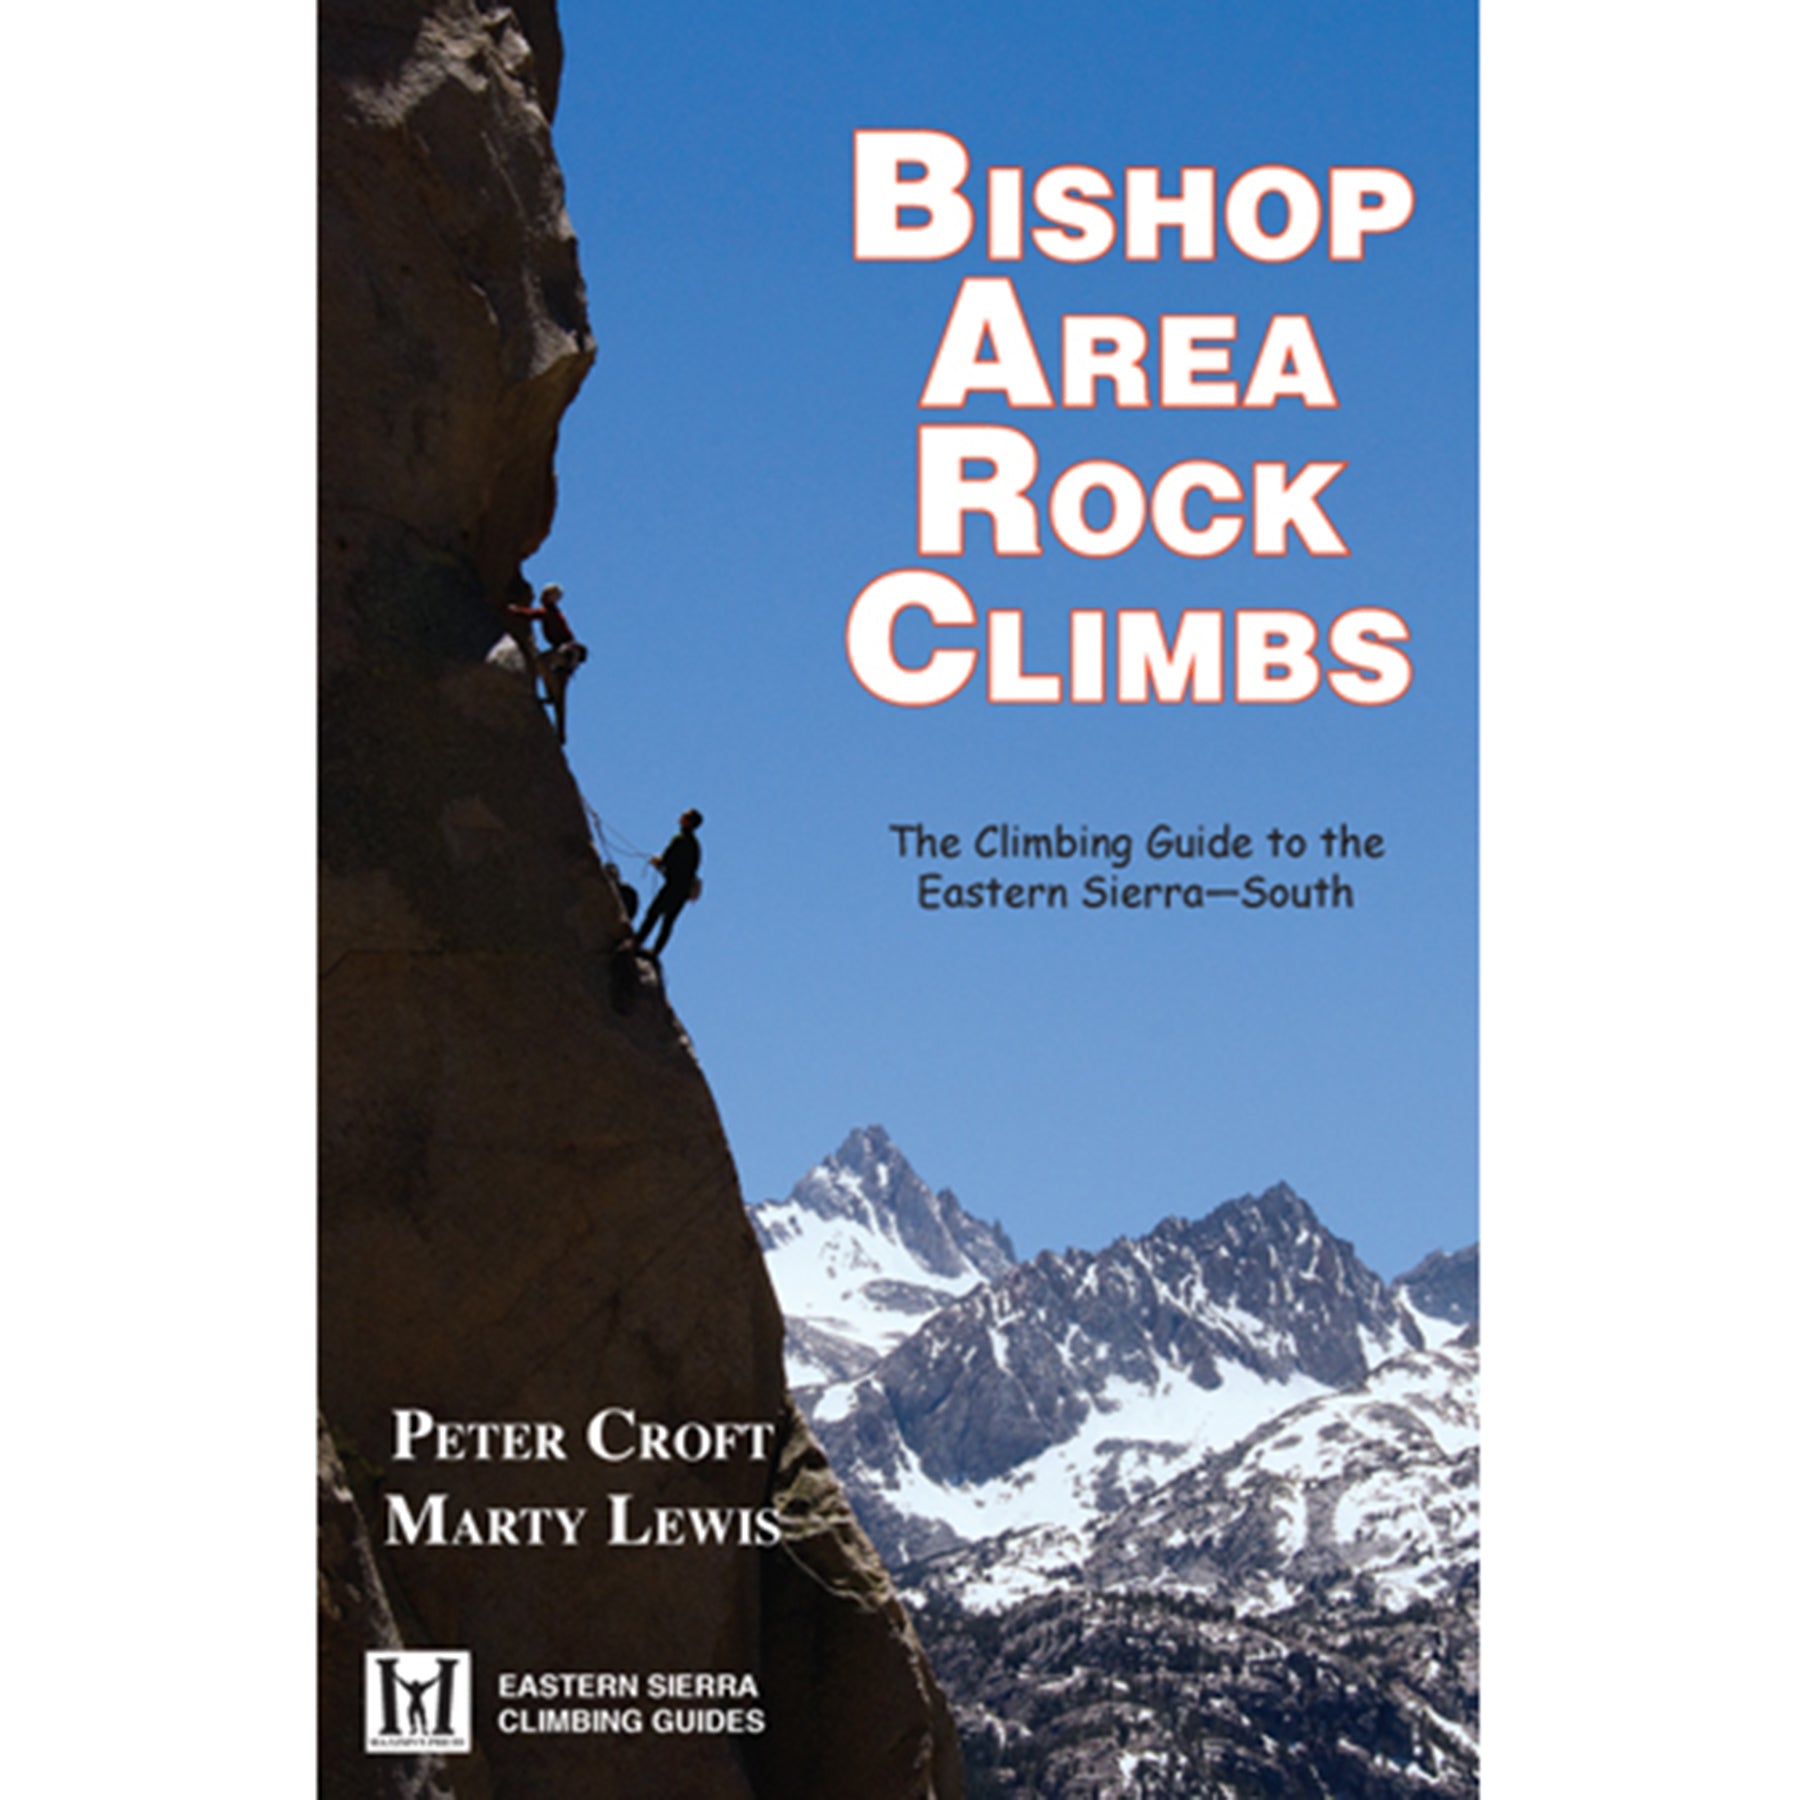 The cover of the Bishop Area Rock Climbs book